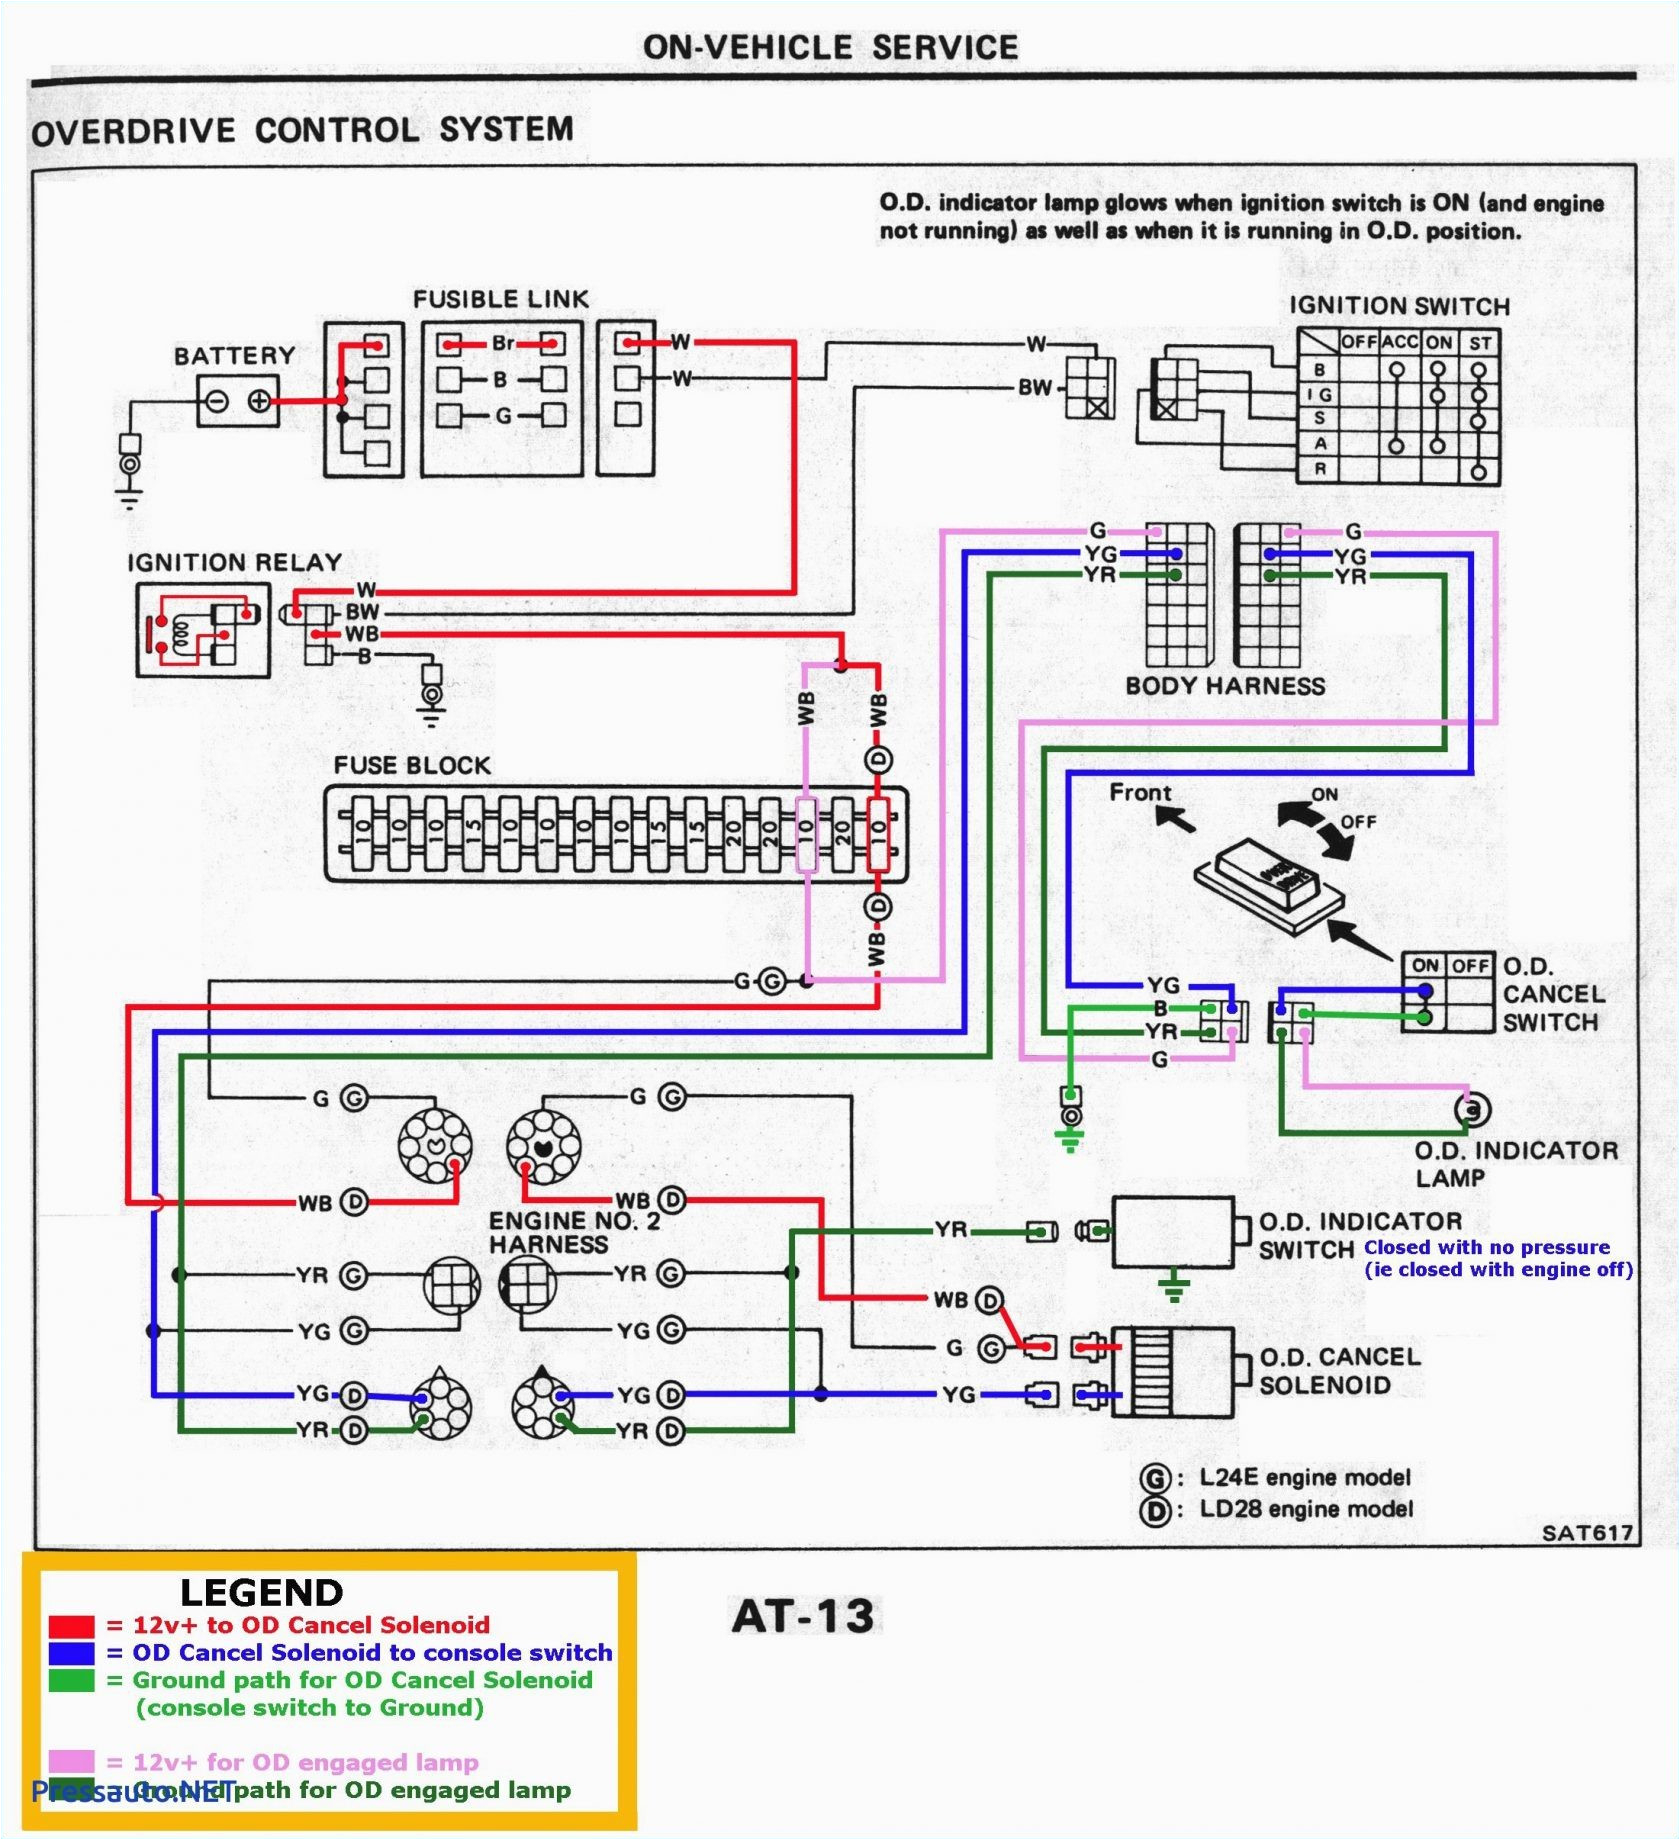 wiring diagram for 2005 nissan altima get free image about wiring warning light symbols on 2005 nissan sentra headlight wiring harness